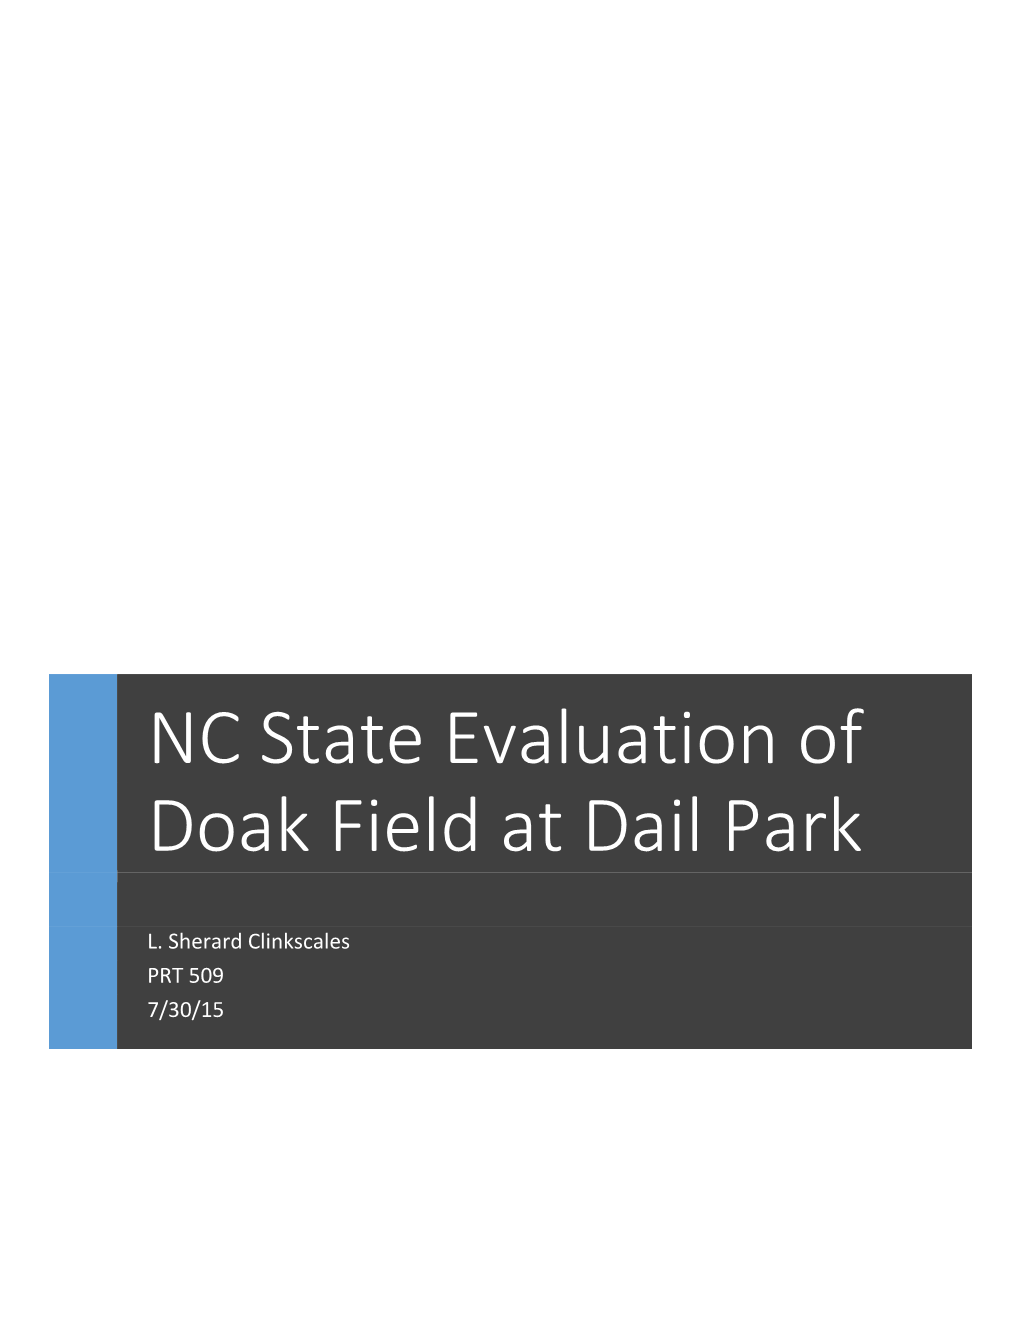 NC State Evaluation of Doak Field at Dail Park